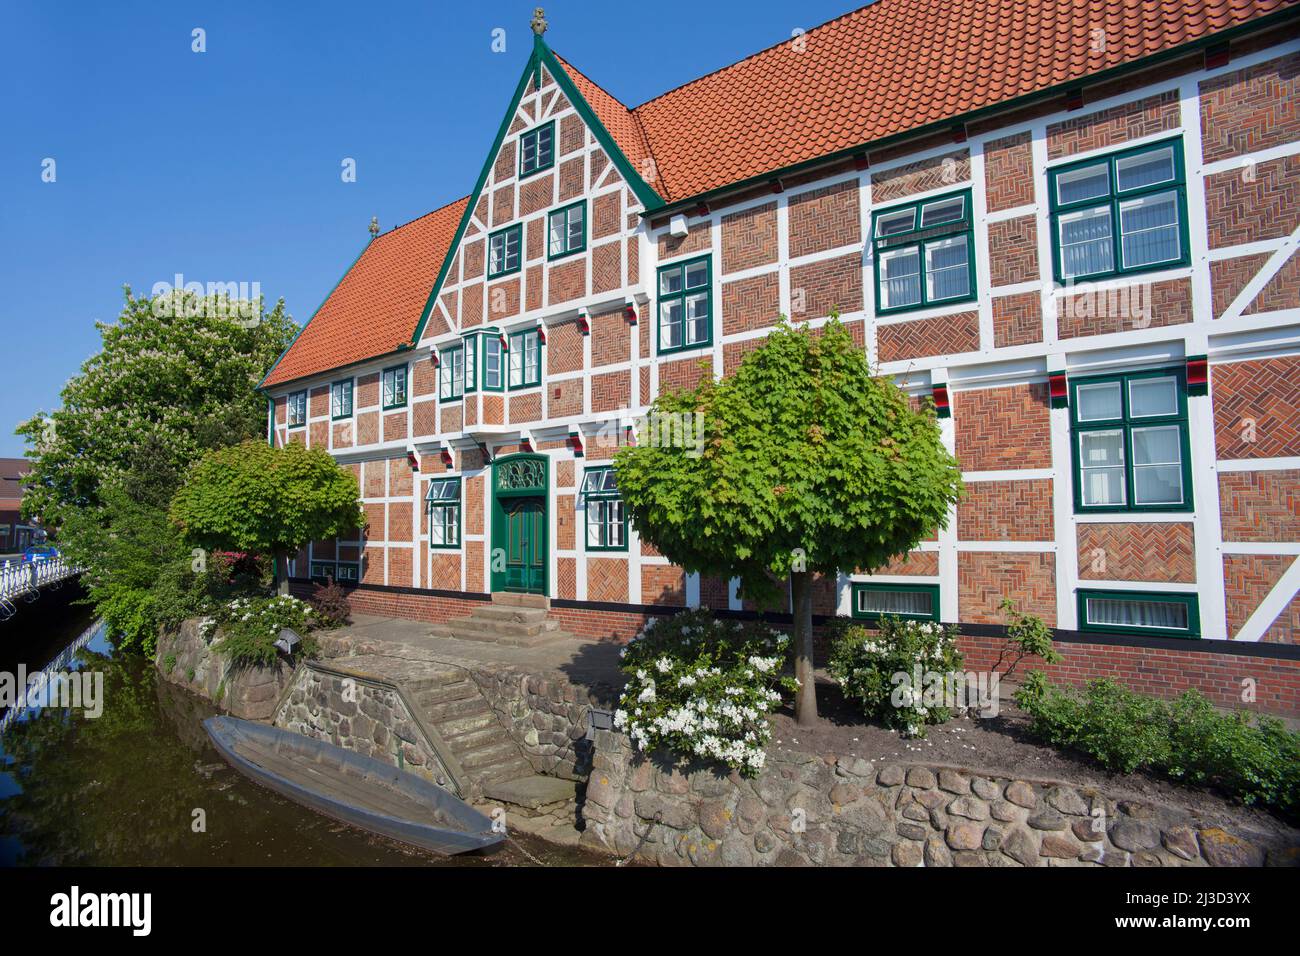 Timber frame / half-timbered town hall of Jork, capital of the Altes Land, district of Stade, Lower Saxony / Niedersachsen, Germany Stock Photo